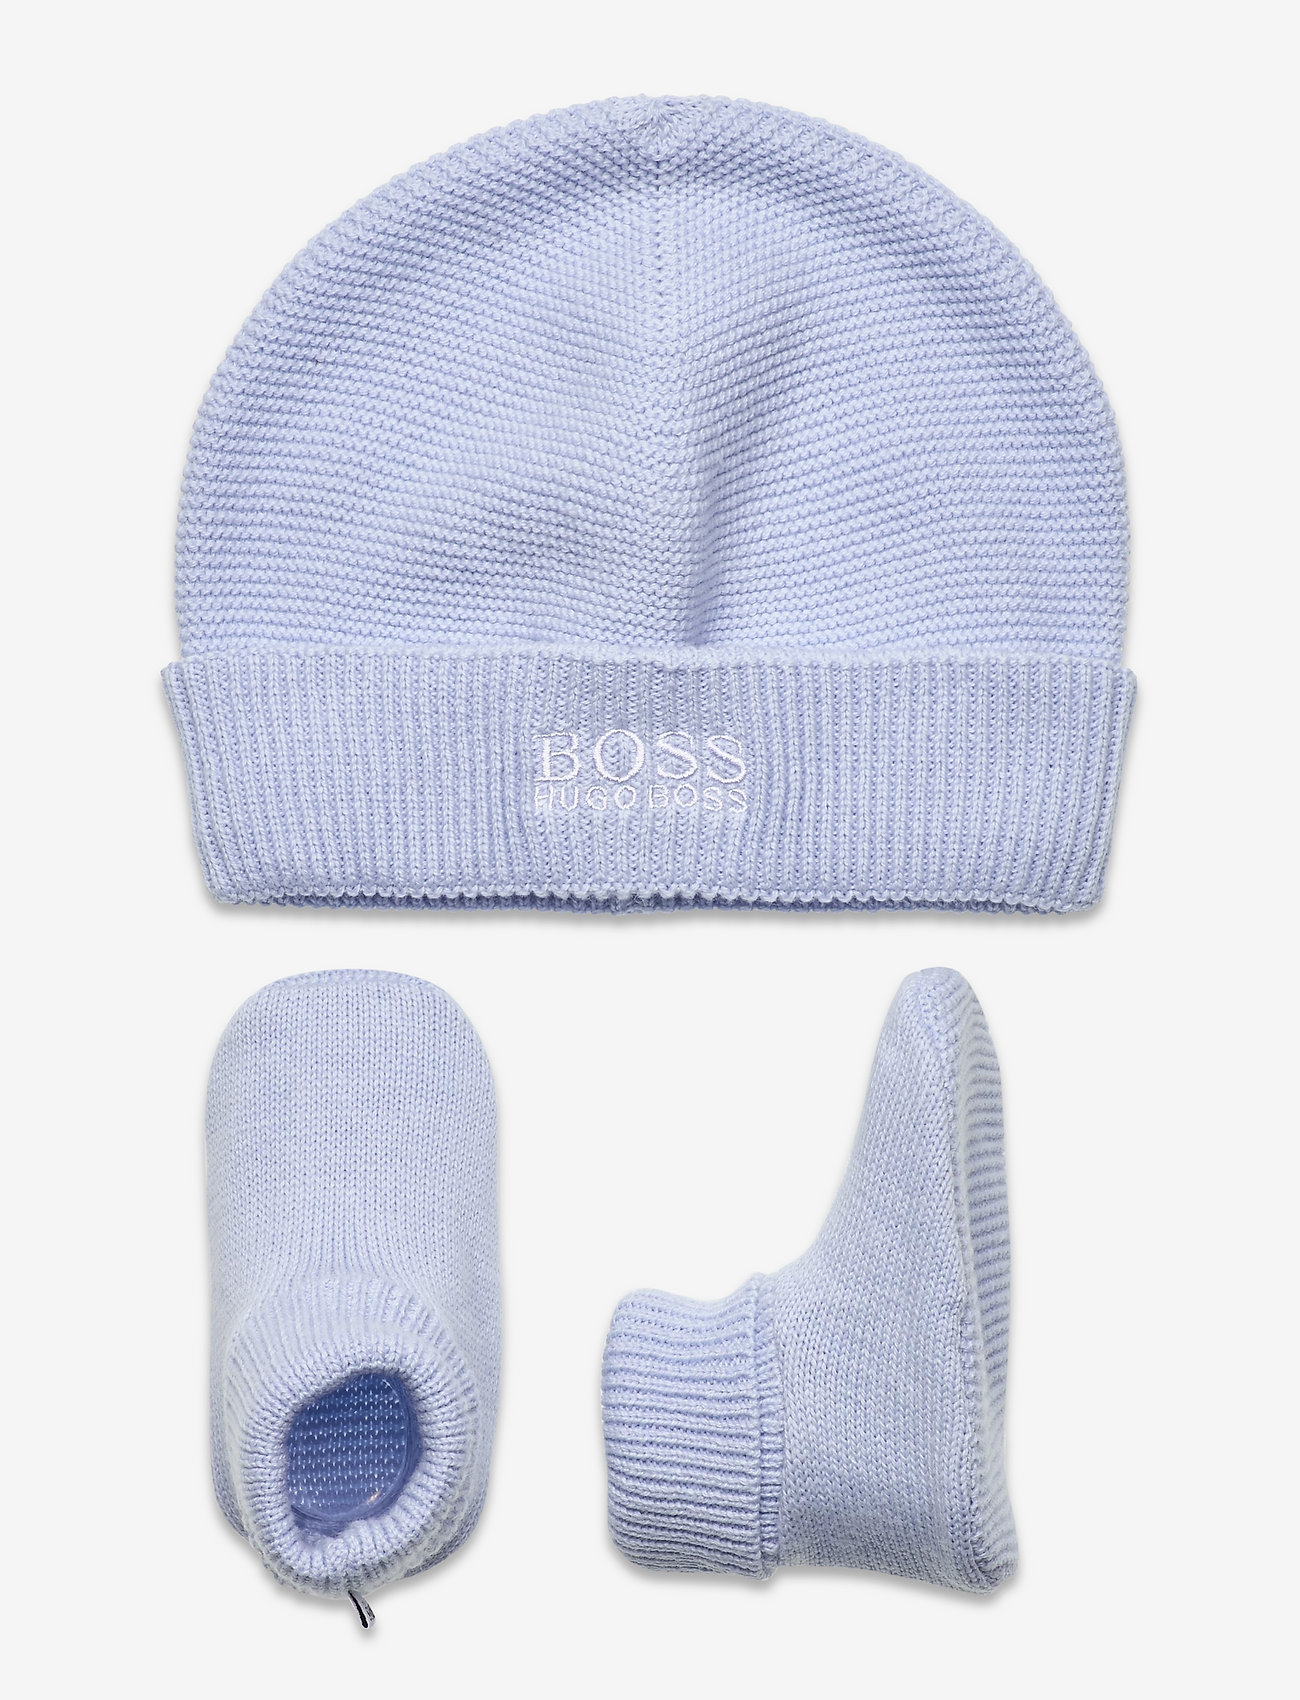 BOSS Pull On Hat+slippers+box Gift sets | Boozt.com